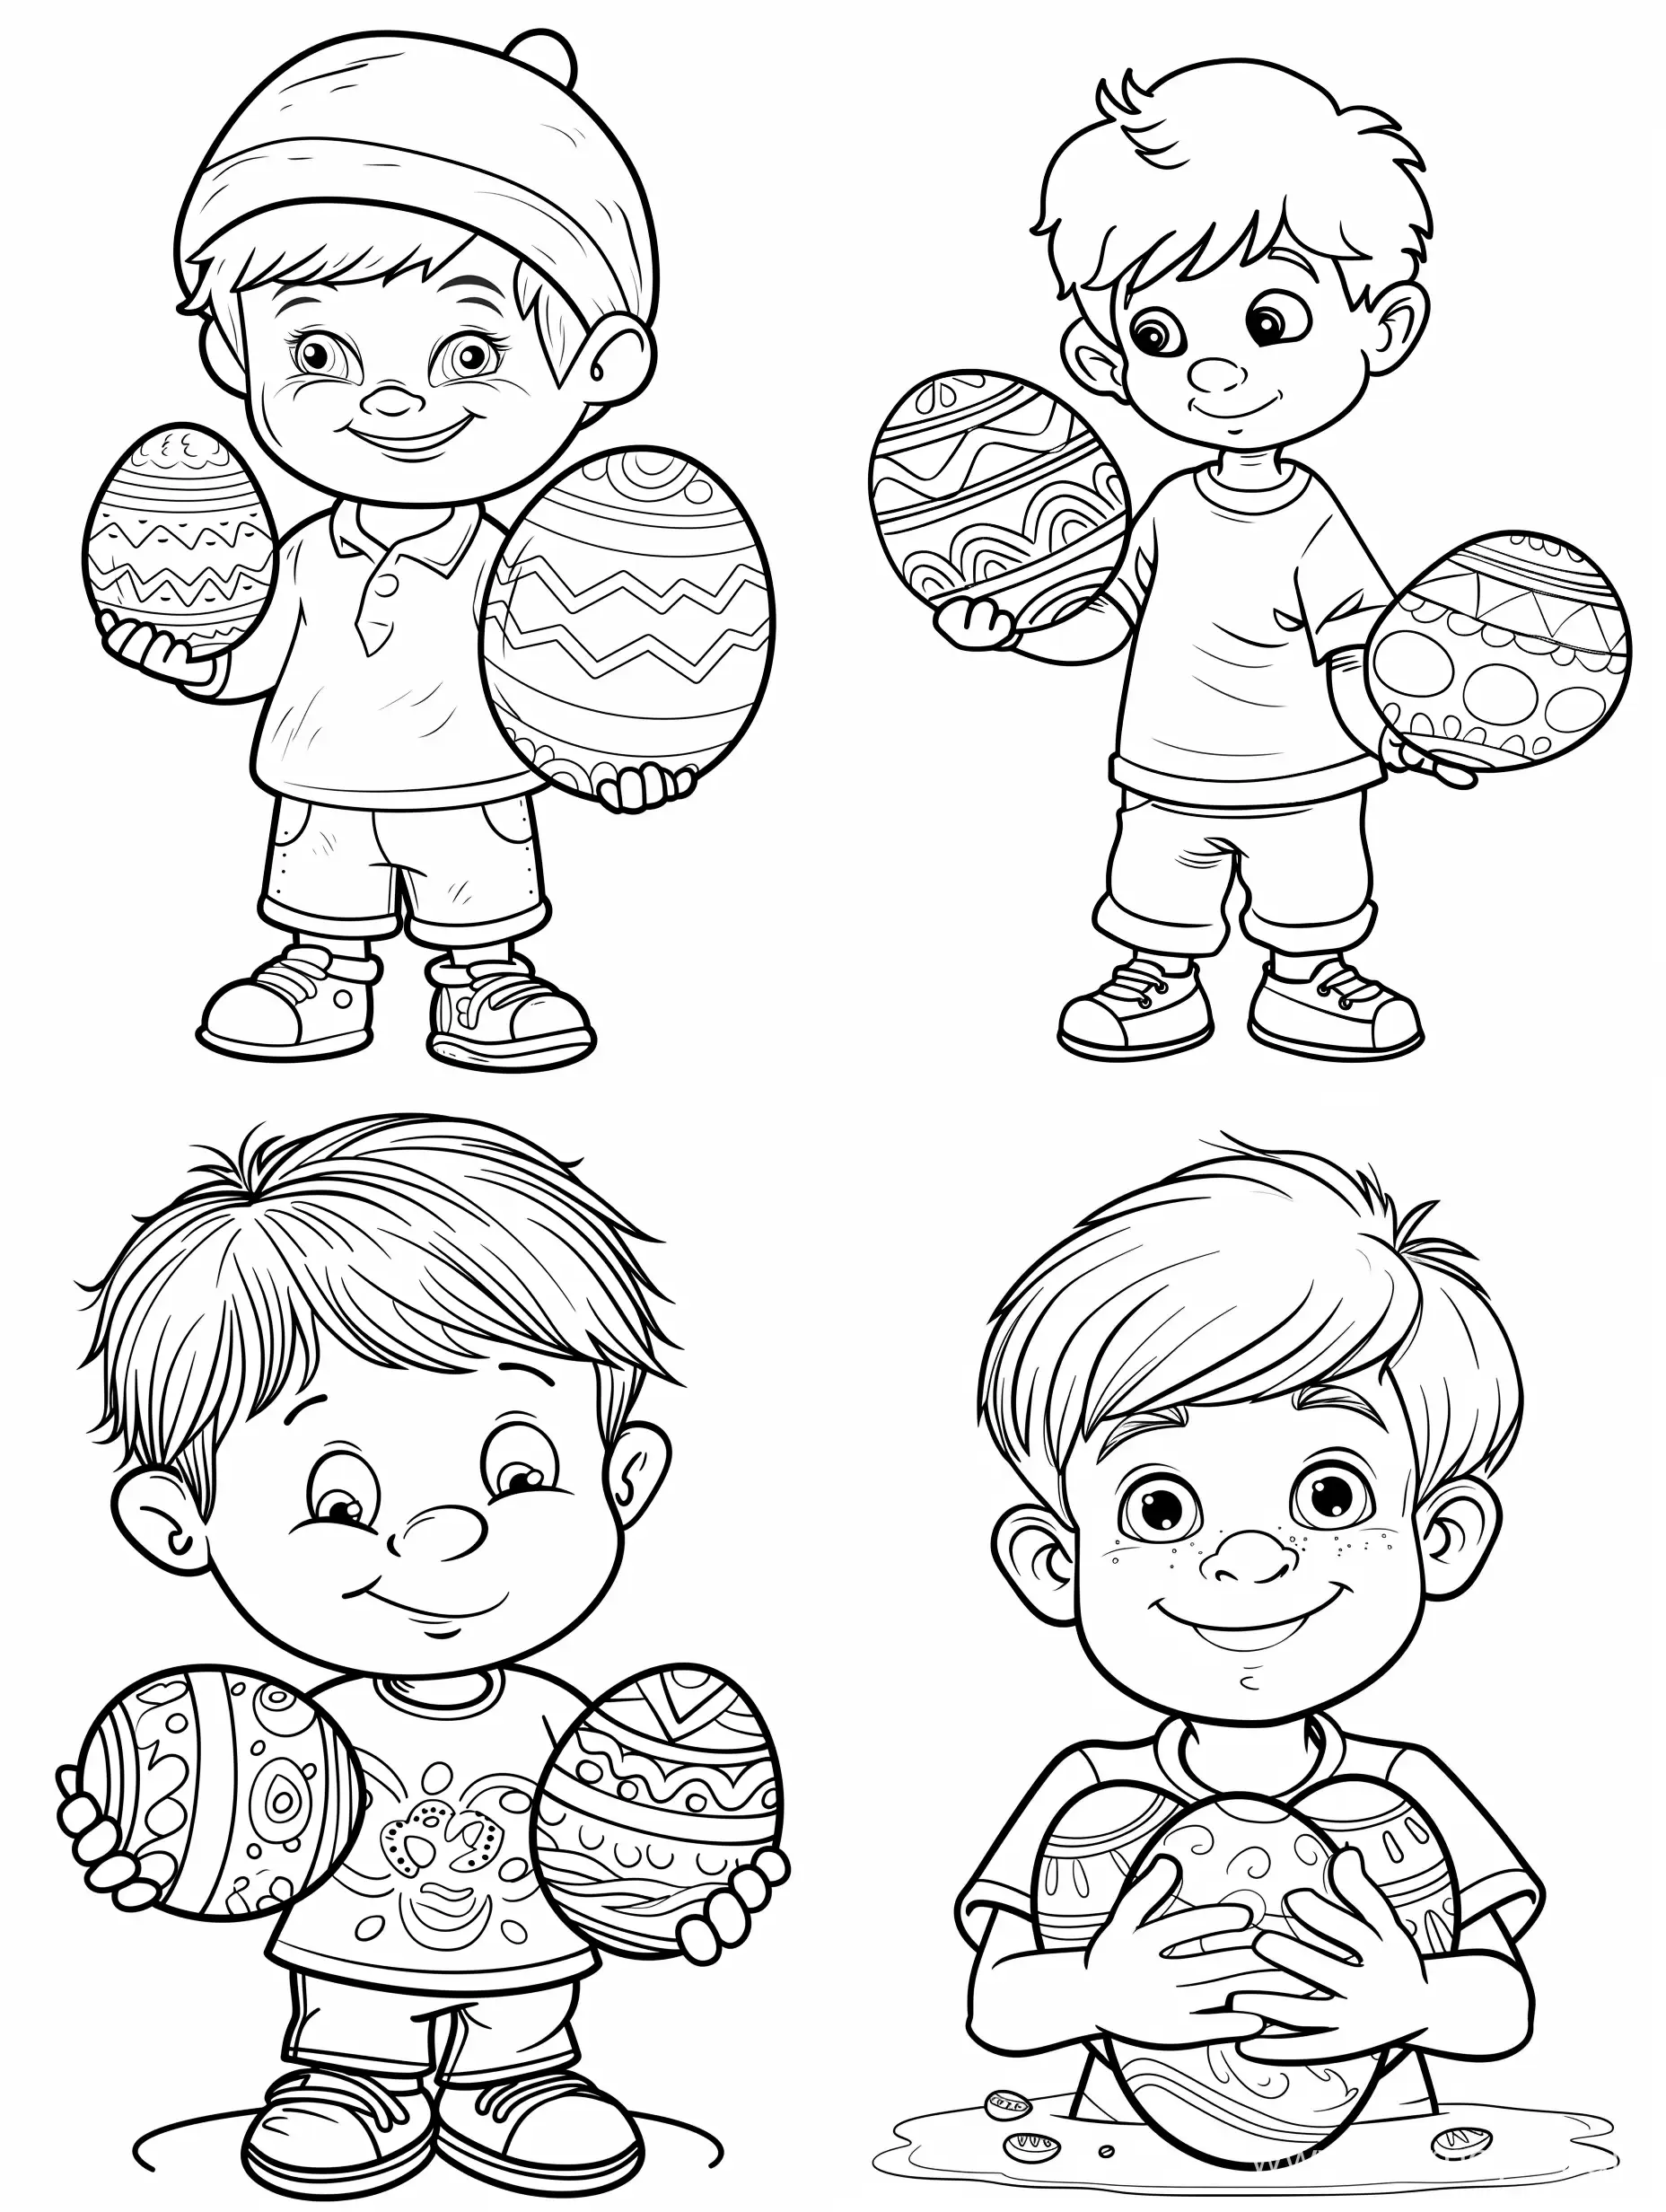 black and white outline art for kids easter coloring book page Coloring pages for kids, full white, kids style, white background, full body, Sketch style, (((((white background))))), use just outline, cartoon style, line art, coloring book, clean line art, white background, child with easter eggs